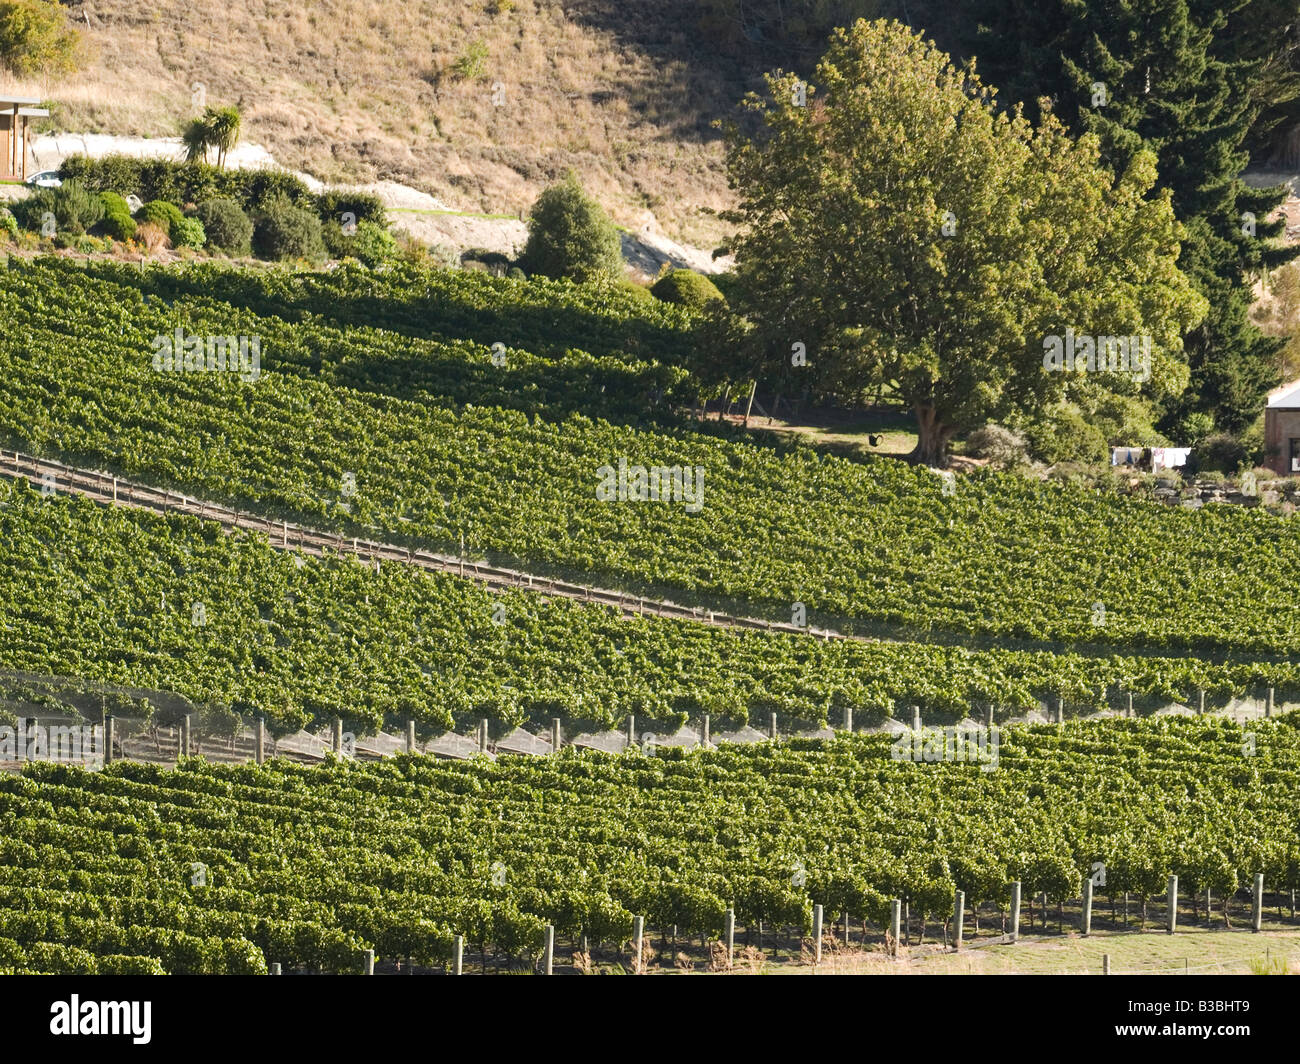 Pinot noir grapevines at Chard Farm vineyard and winery, Central Otago, New Zealand Stock Photo